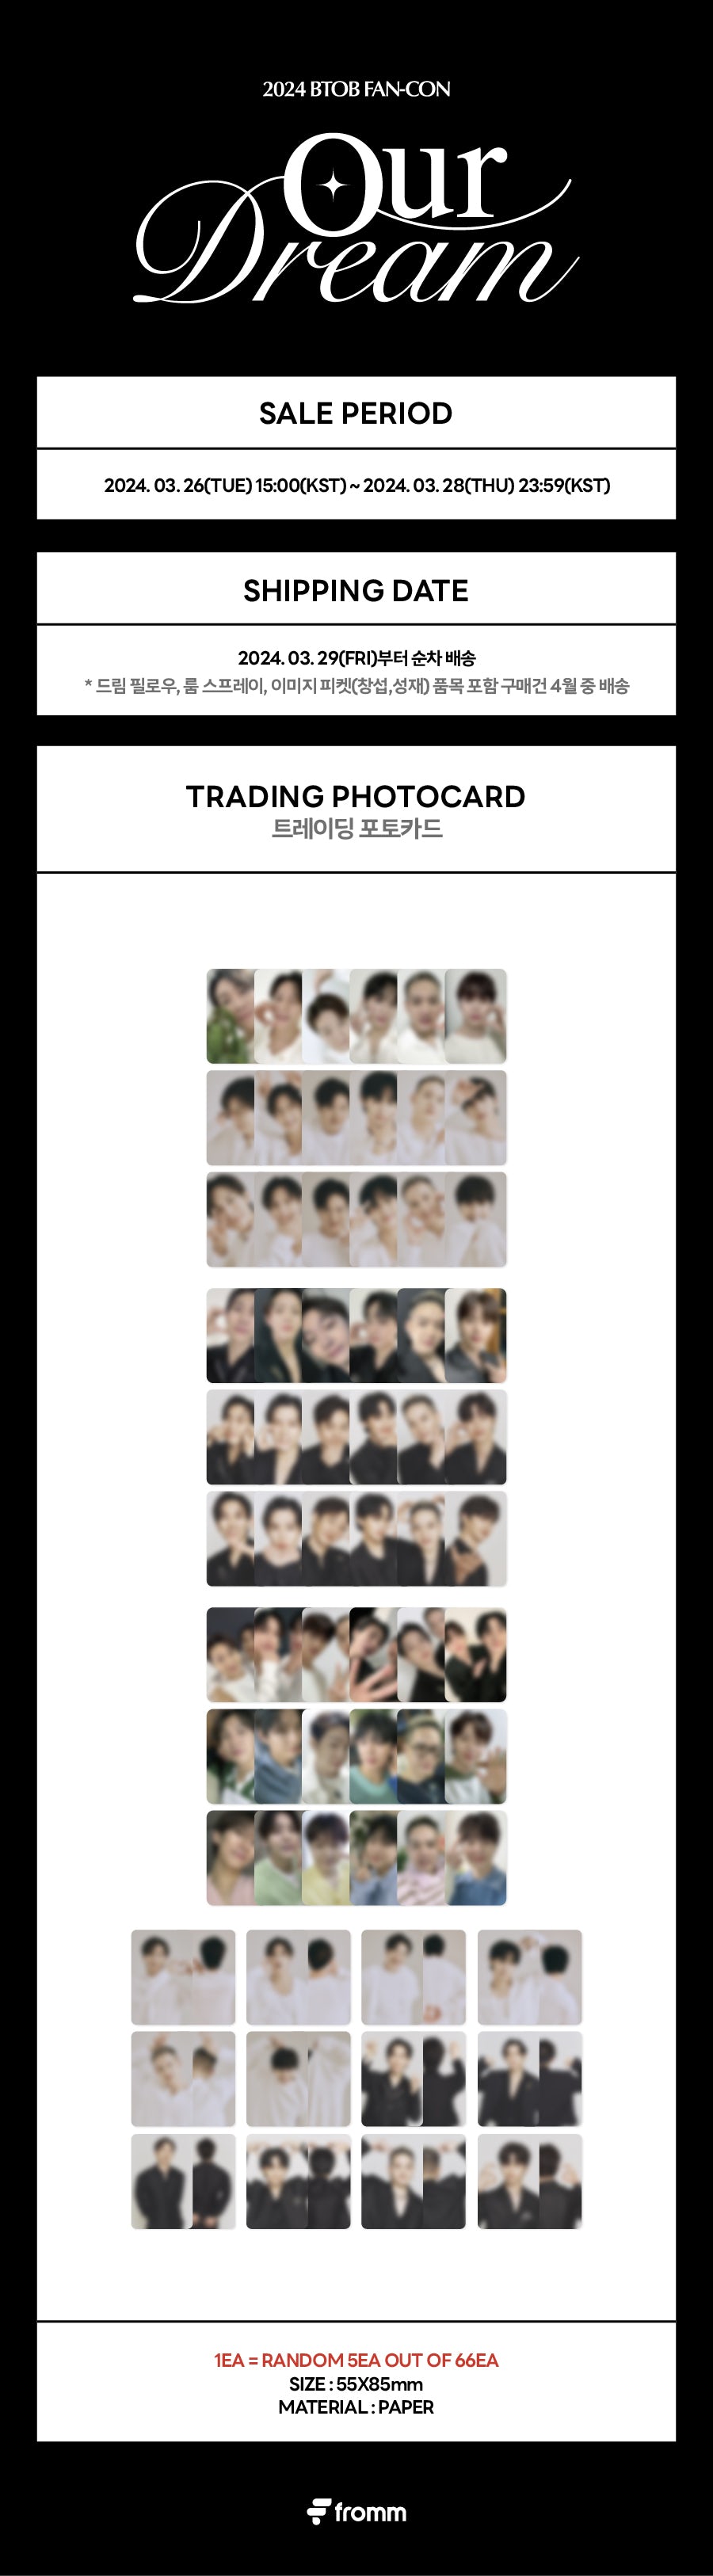 BTOB [OUR DREAM] TRADING PHOTOCARD | fromm store